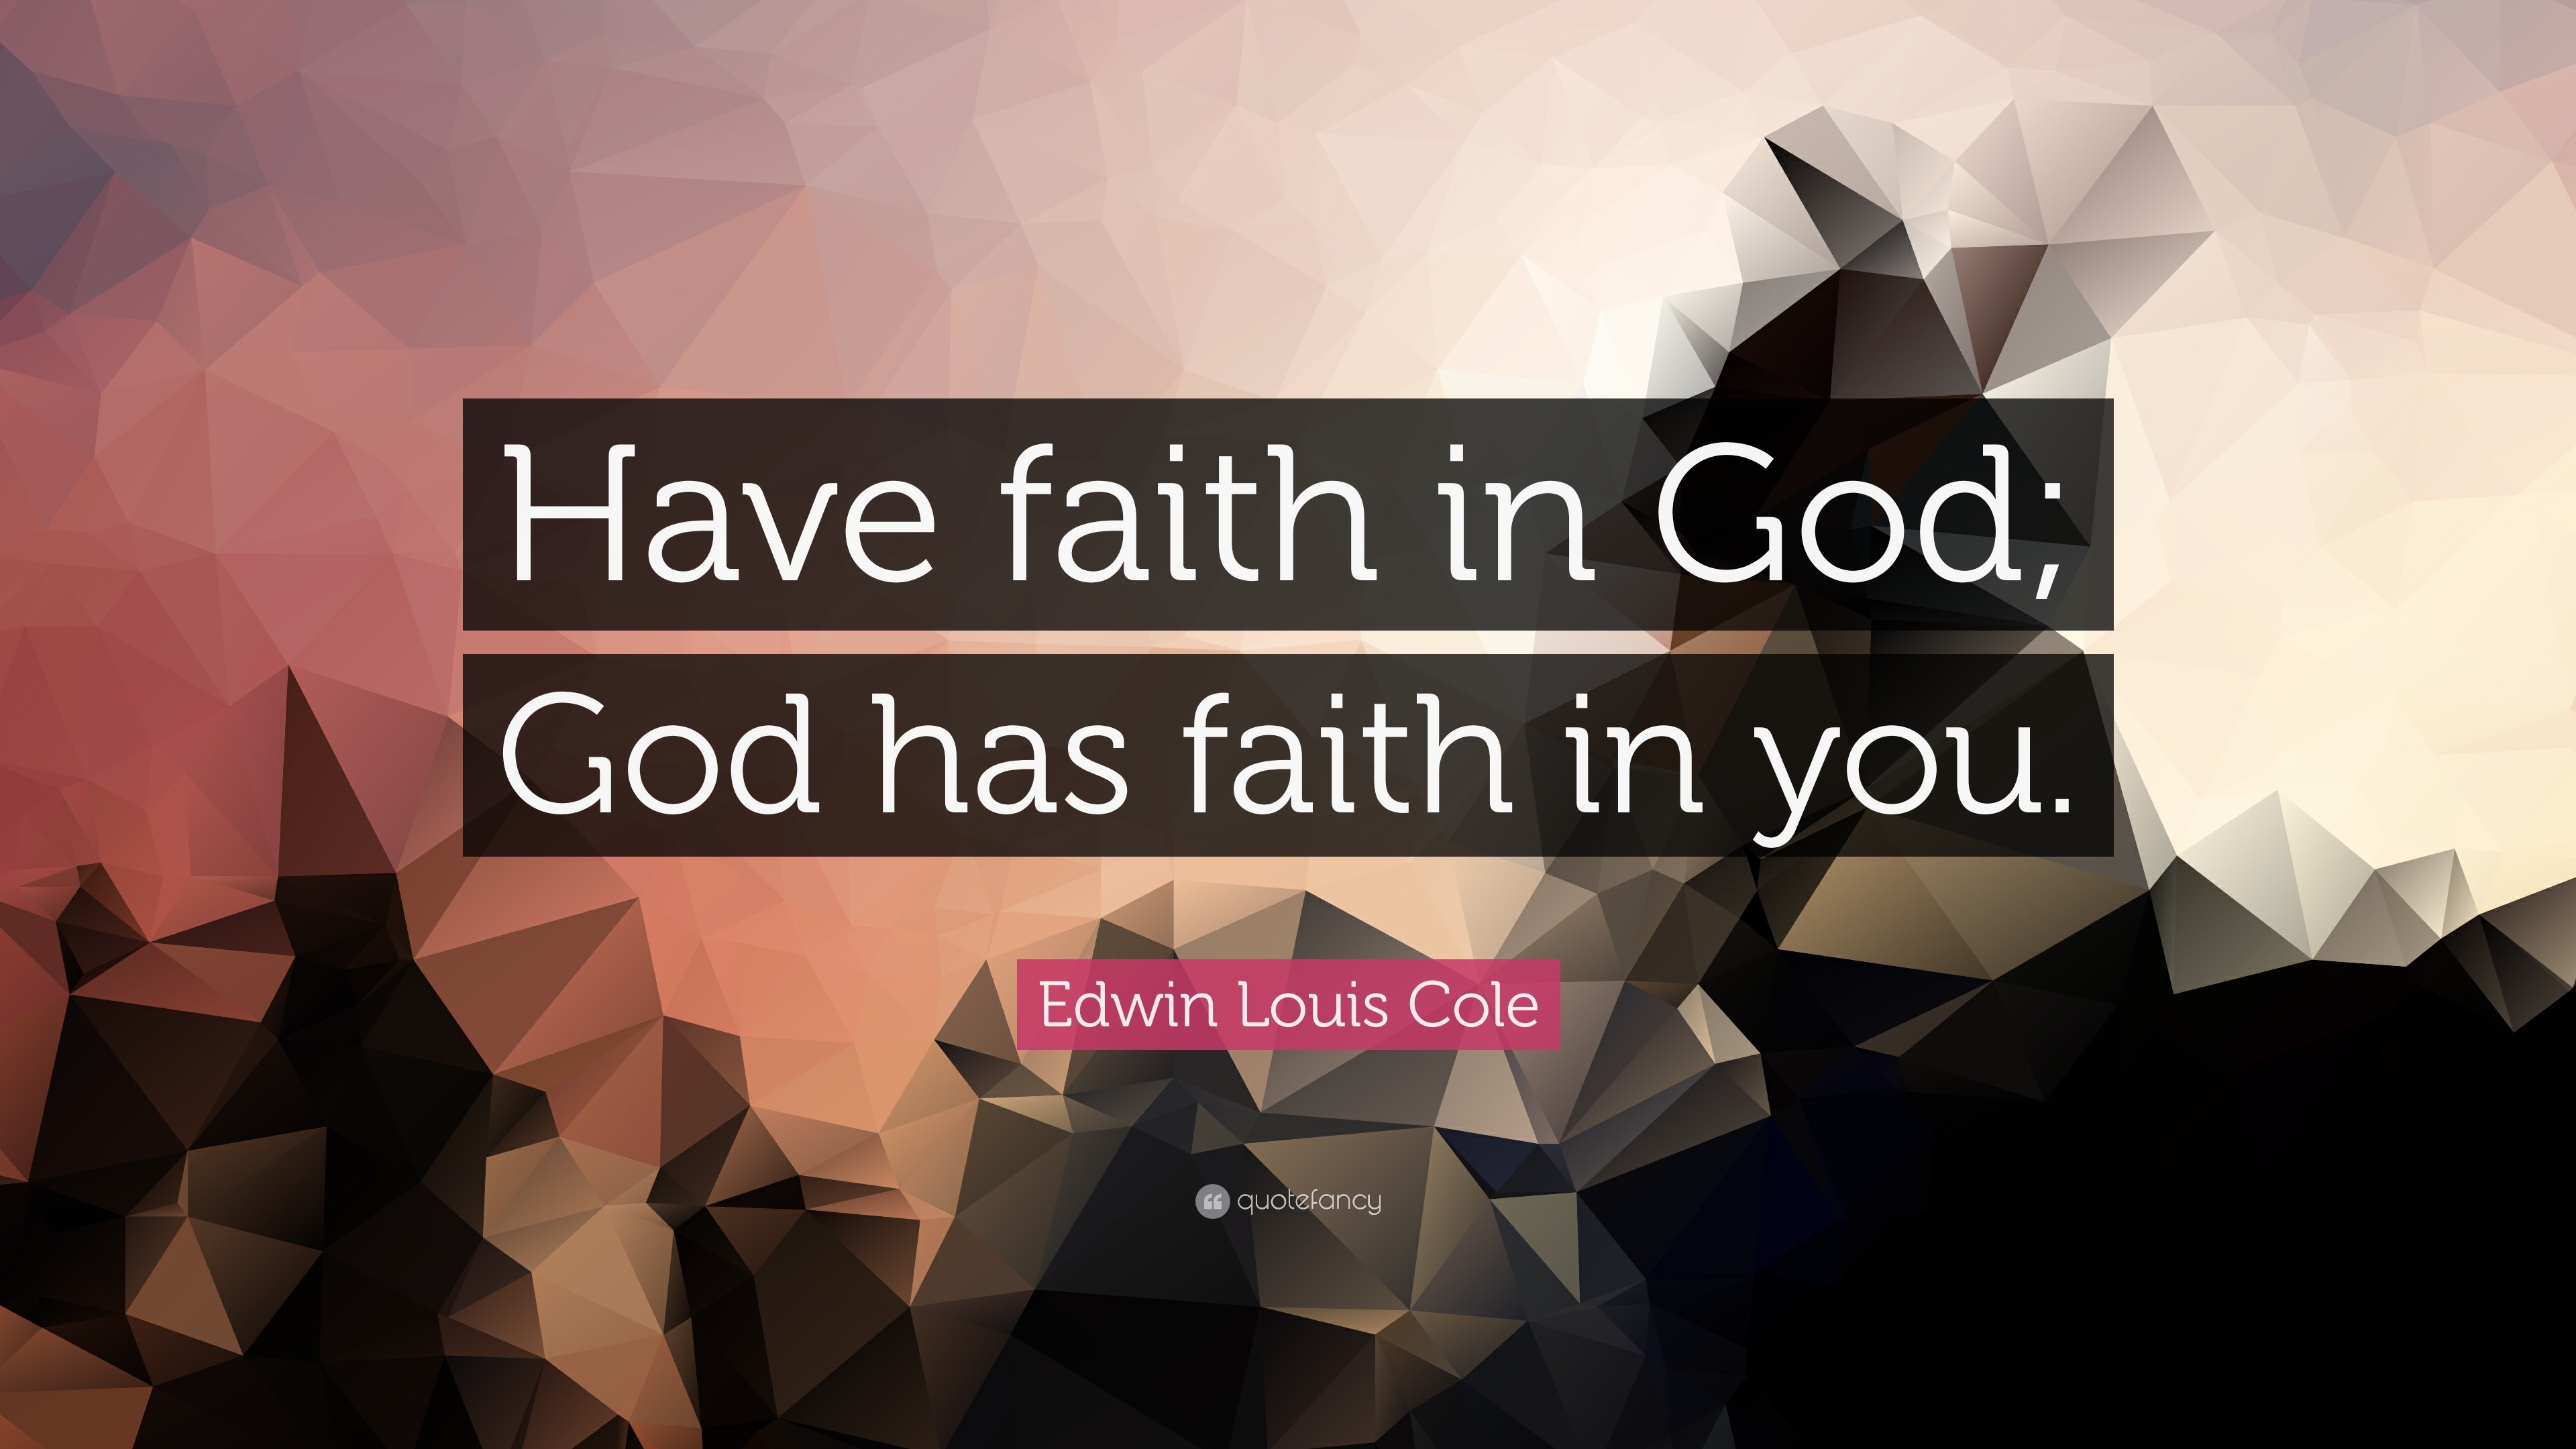 49824 Edwin Louis Cole Quote Have faith in God God has faith in you